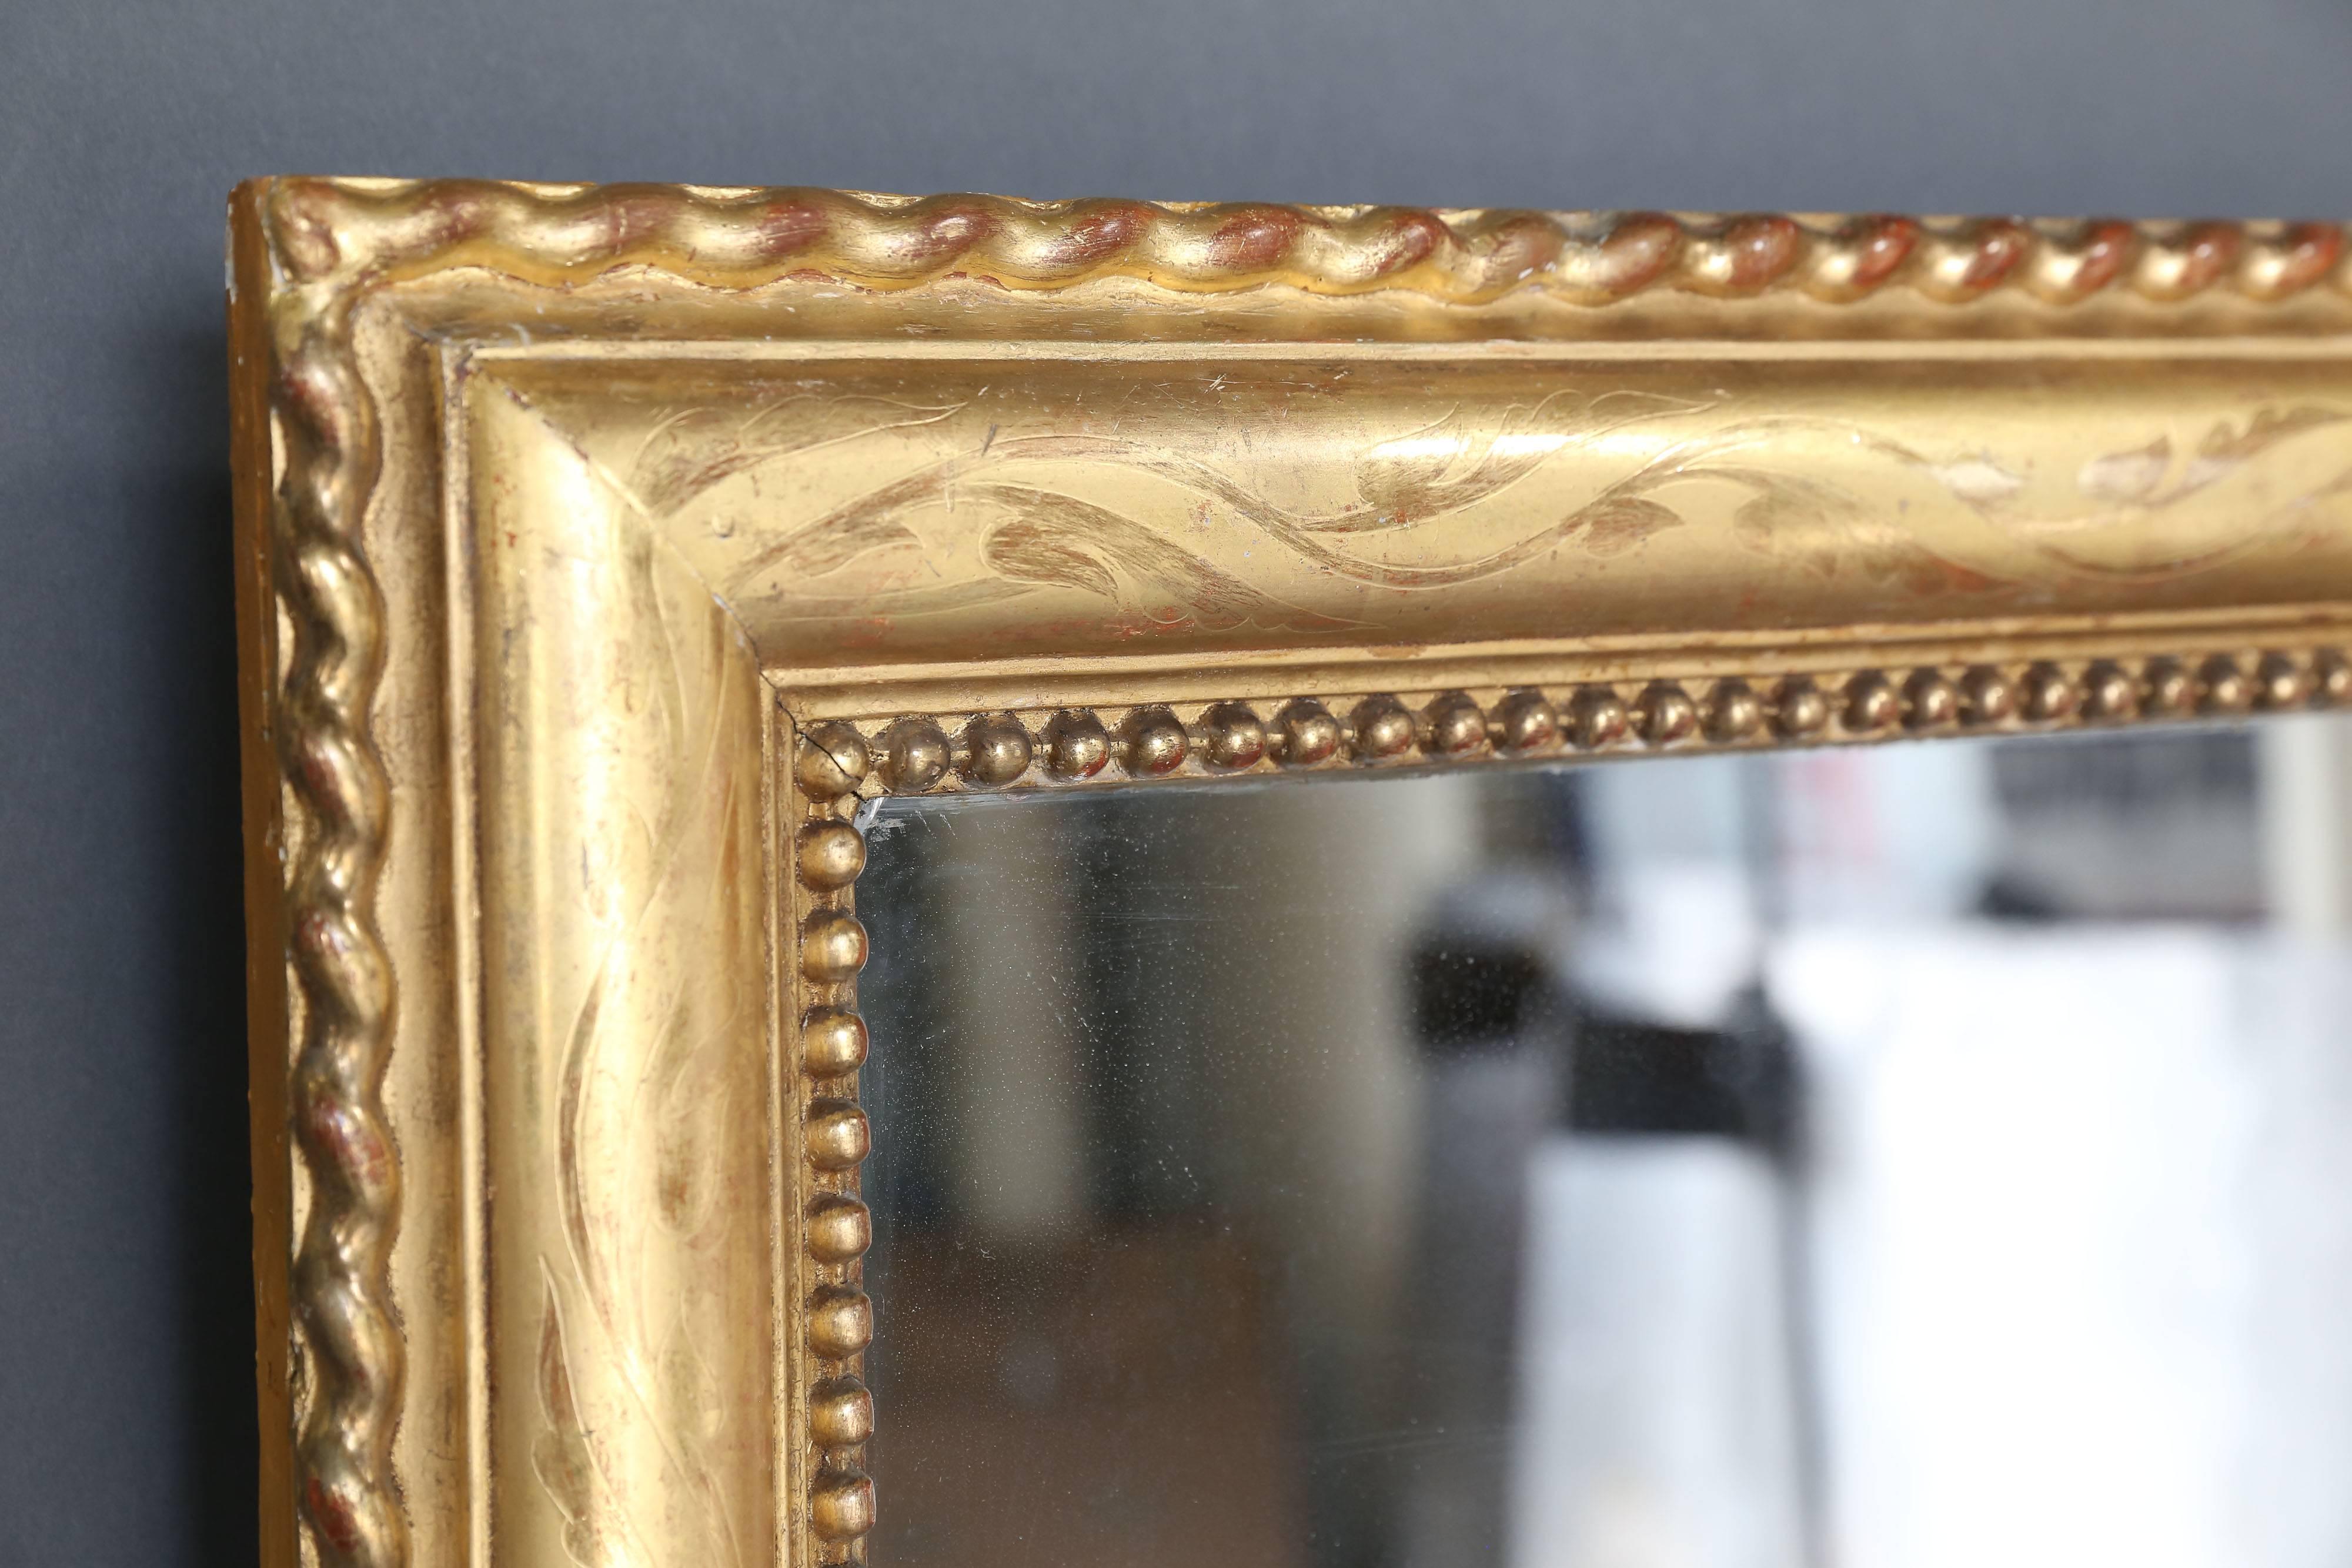 Large rectangular overmantel gilt mirror with etching and rope detail around etched perimeter. In the interior perimeter there is the pearl detail frequently seen in French mirrors of this period. Original mercury glass, circa 1870.